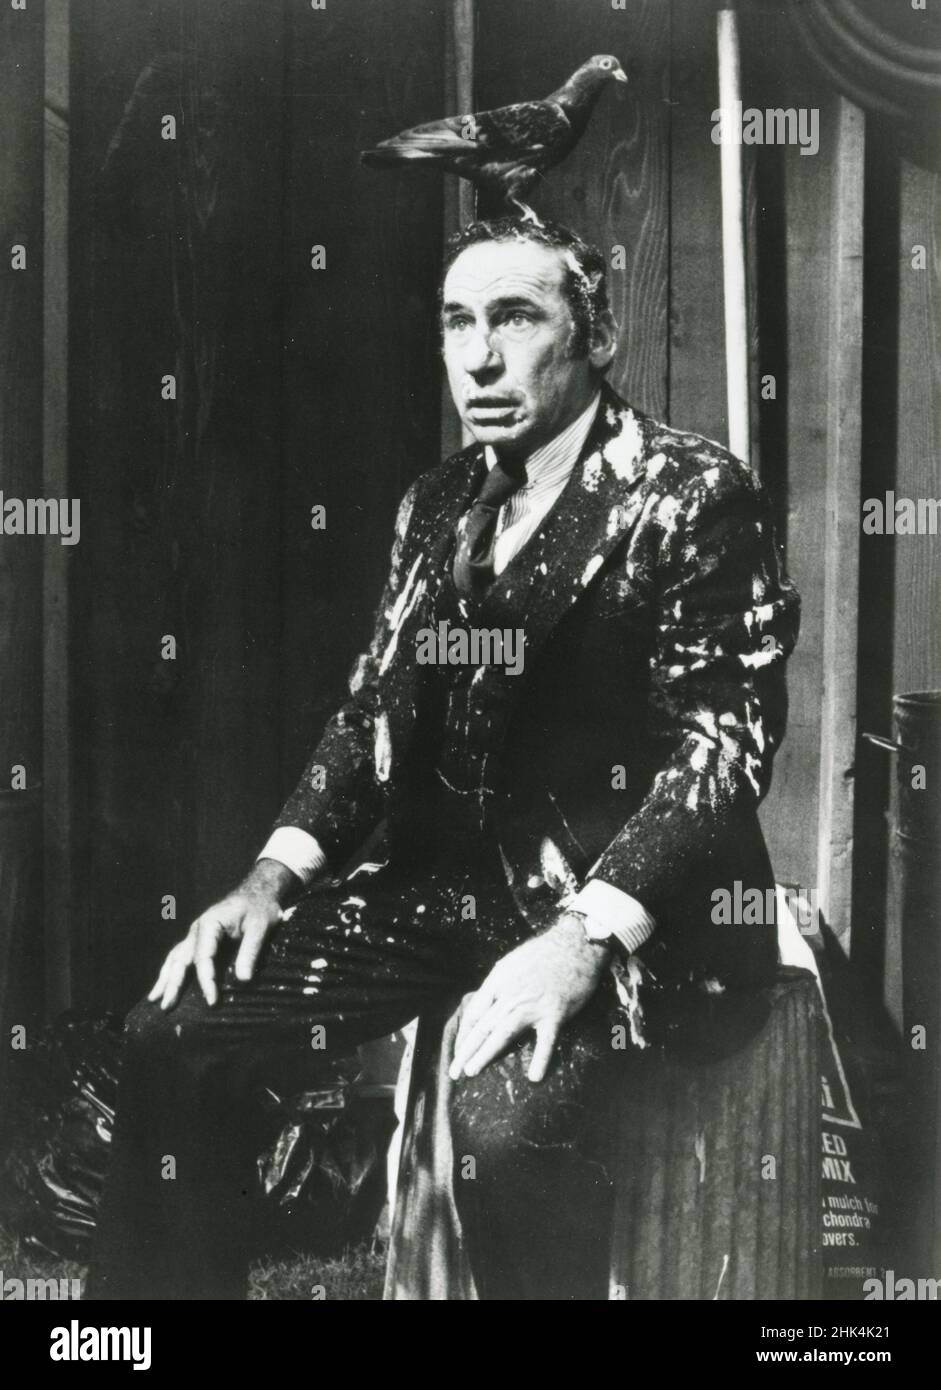 American actor and filmmaker Mel Brooks in the movie High Anxiety, USA 1977 Stock Photo